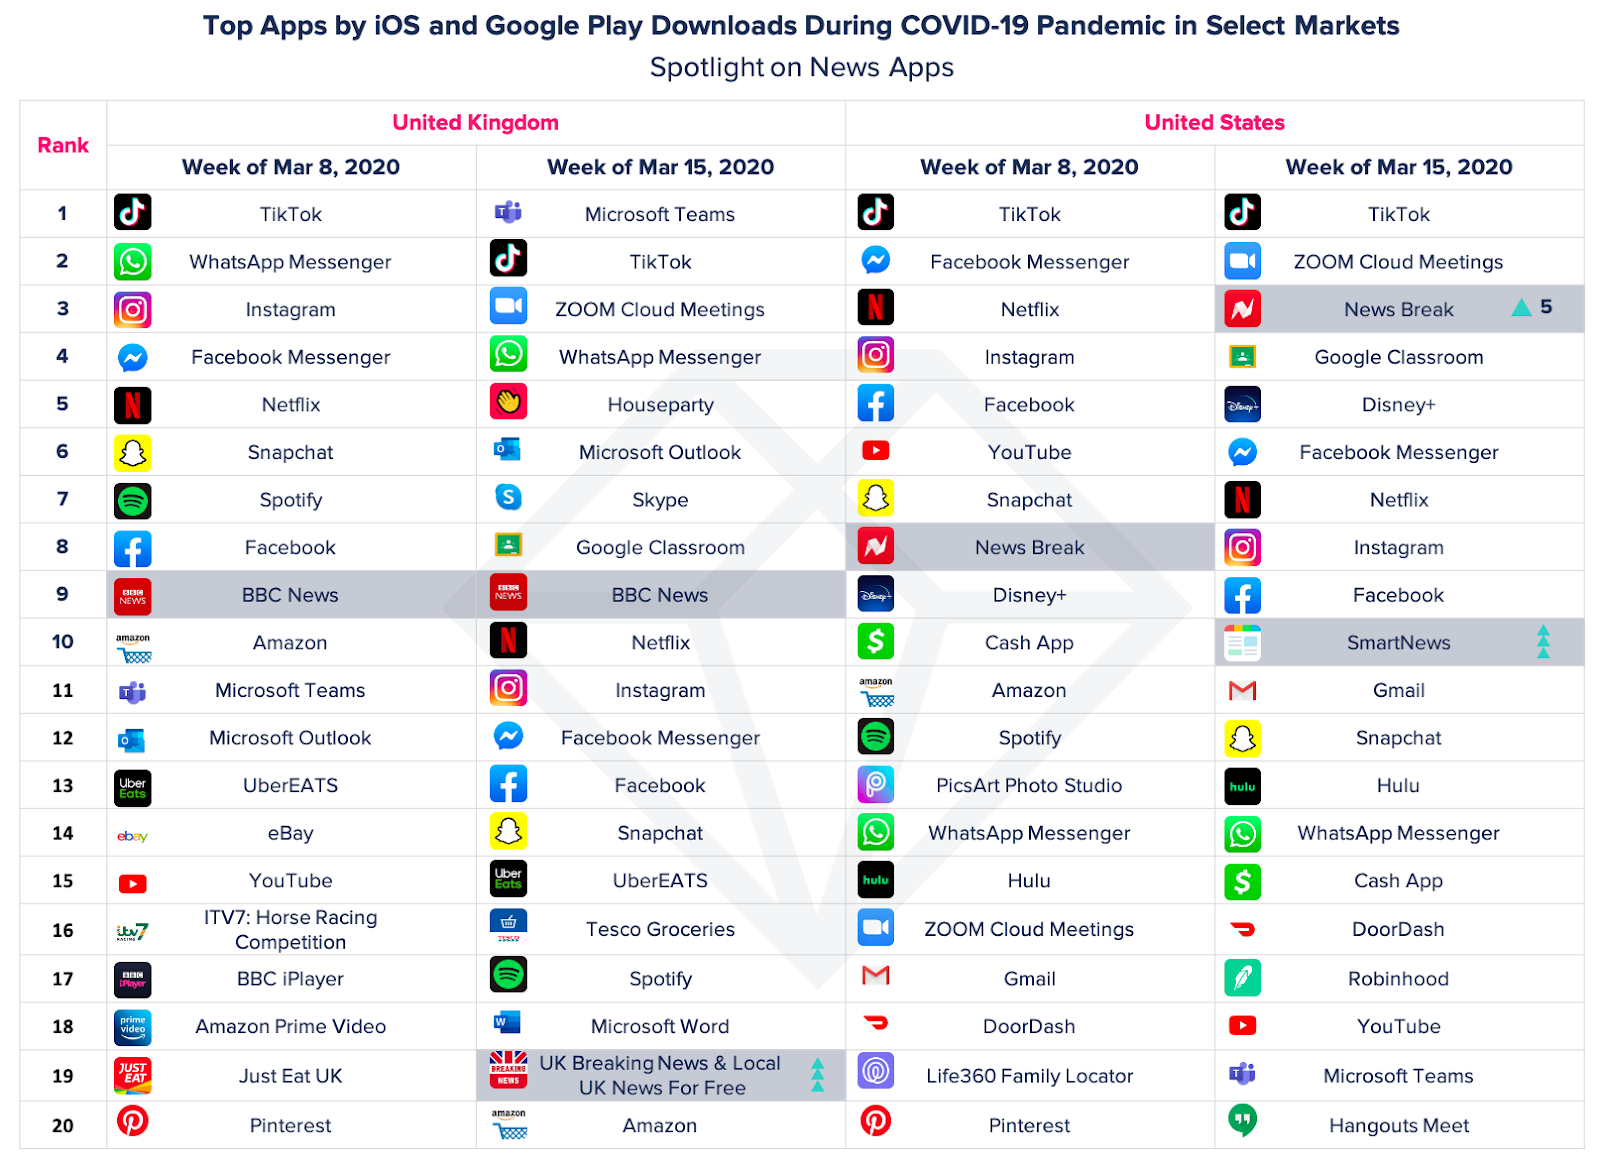 Top apps by iOS and Google Play downloads during Coronavirus Pandemic in select markets